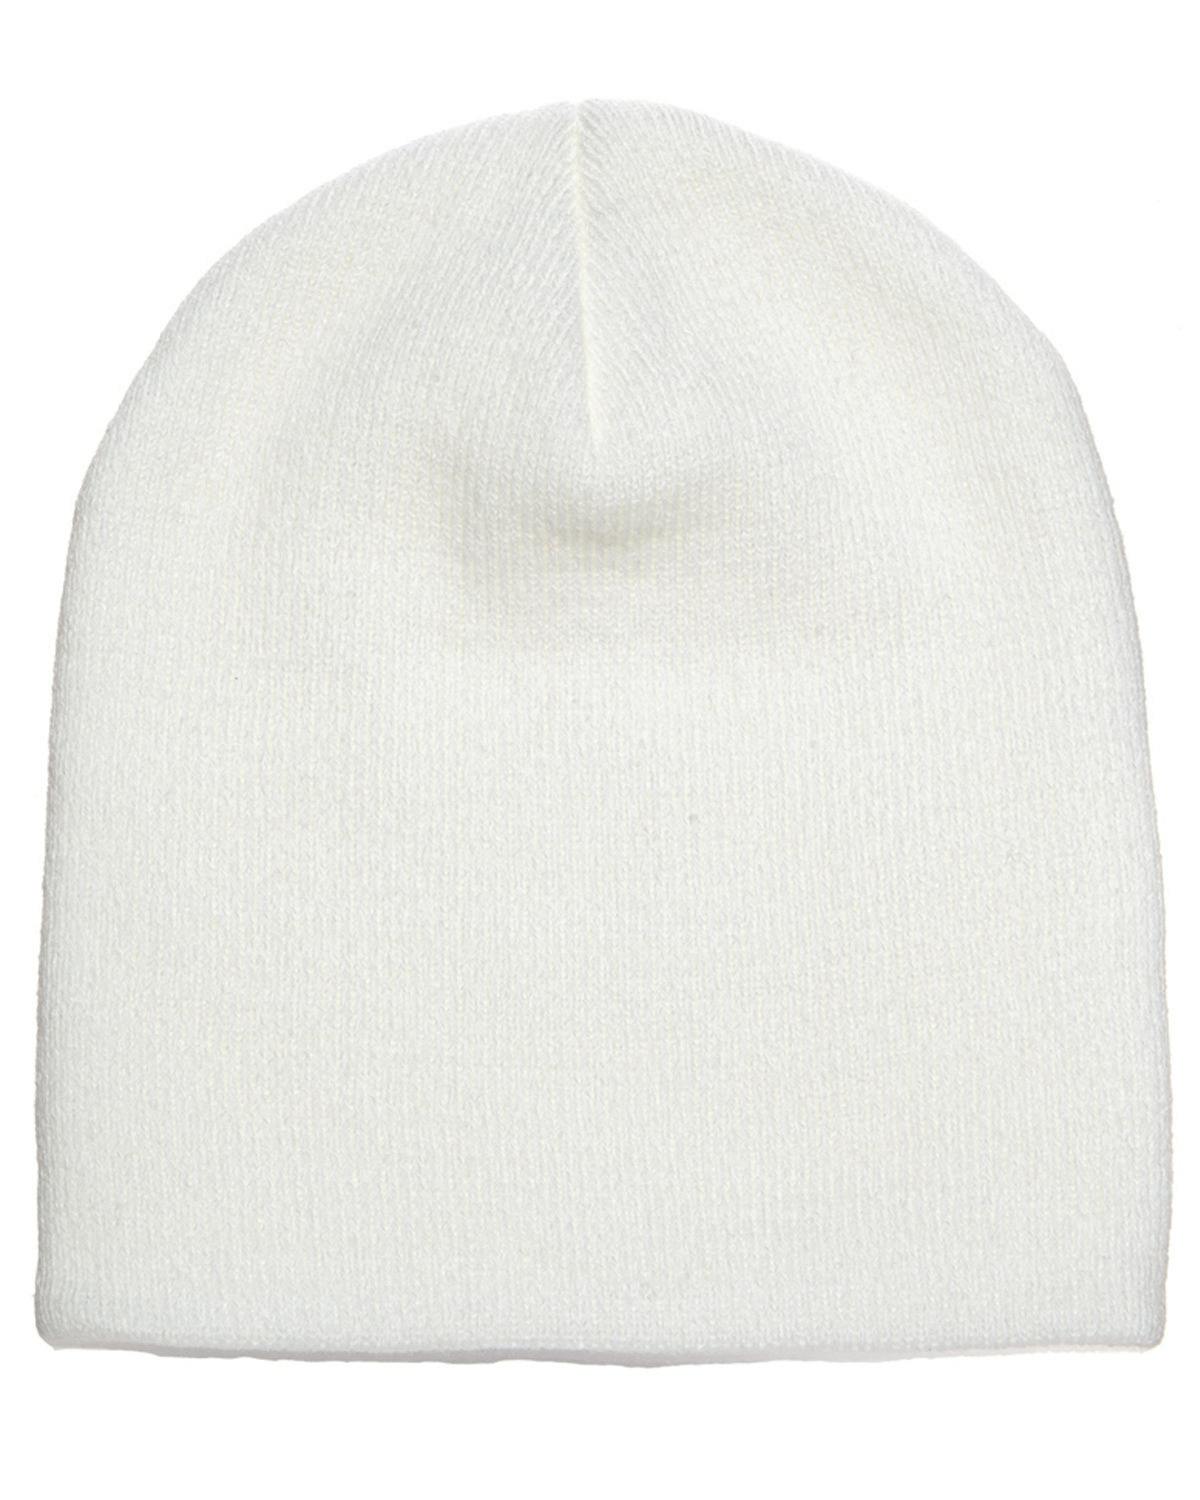 Image for Adult Knit Beanie